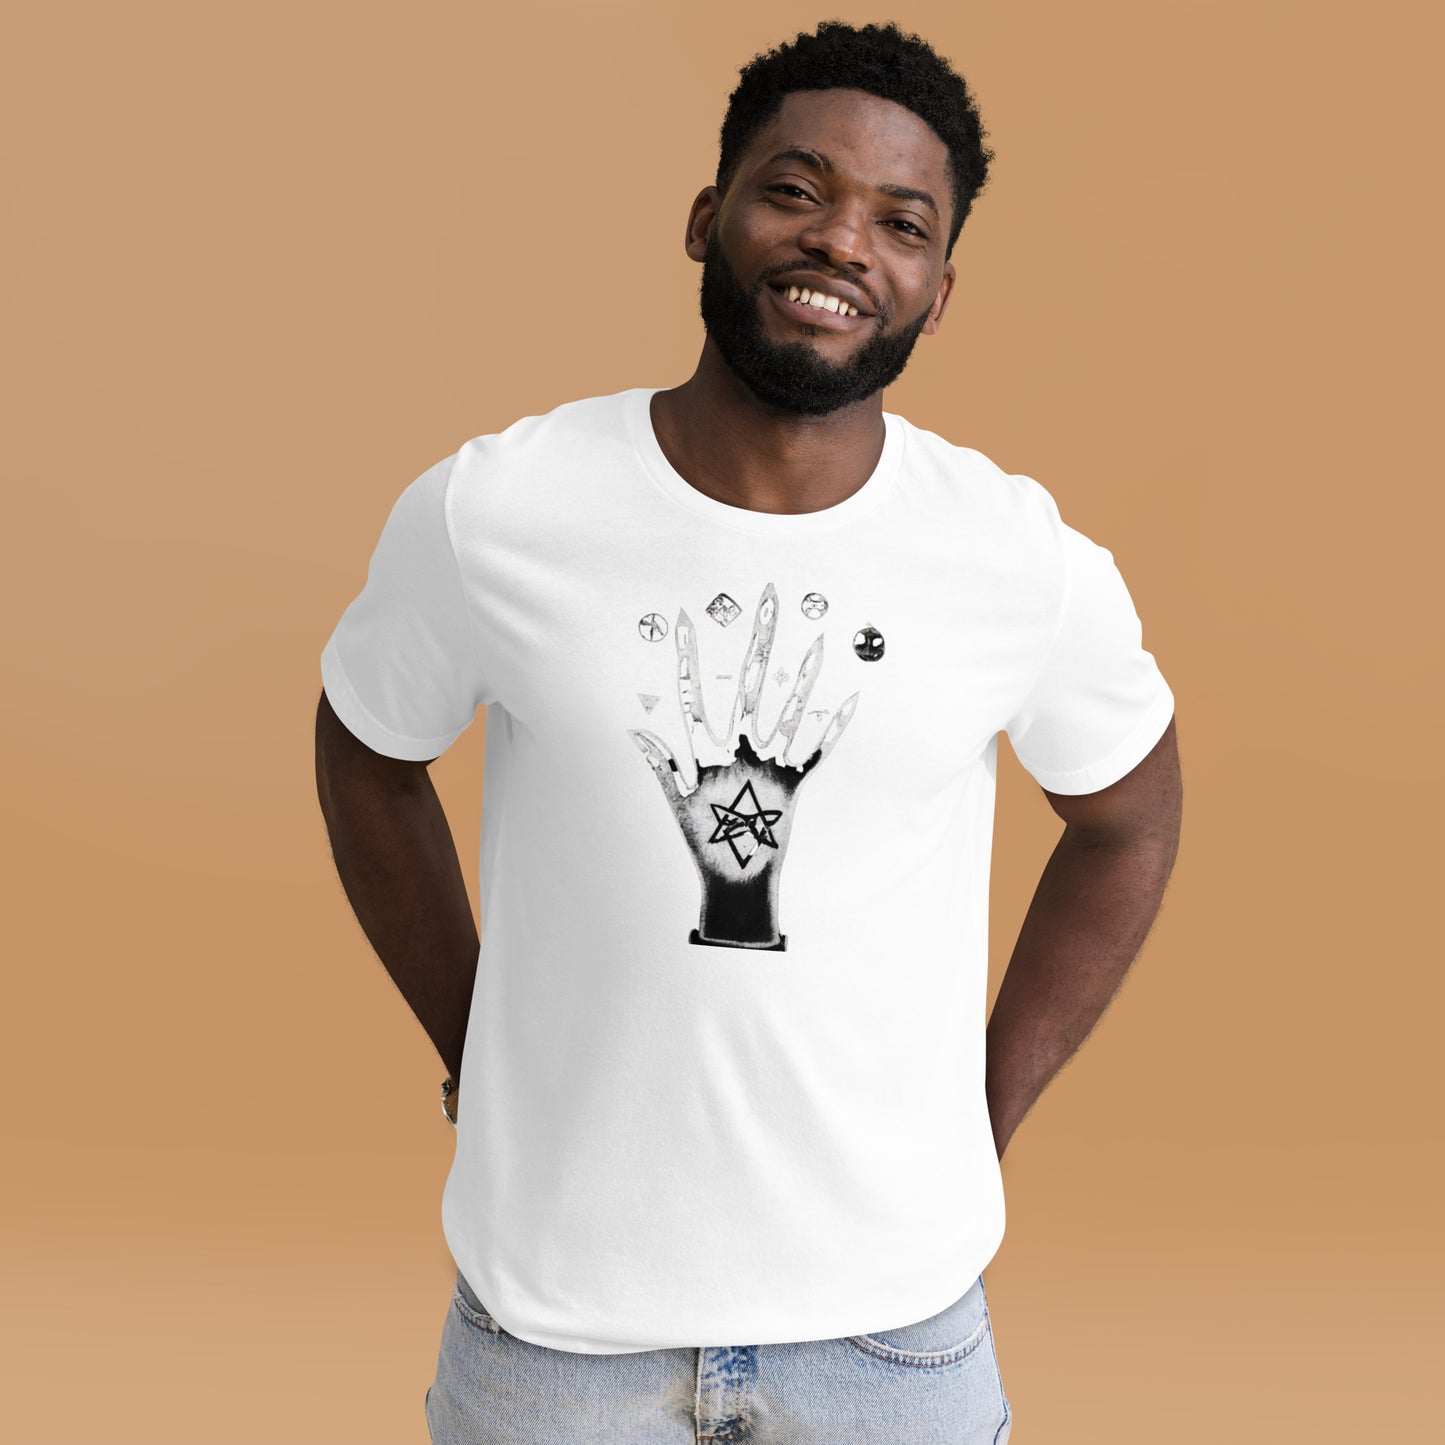 WHICH HAND TOO - Unisex t-shirt